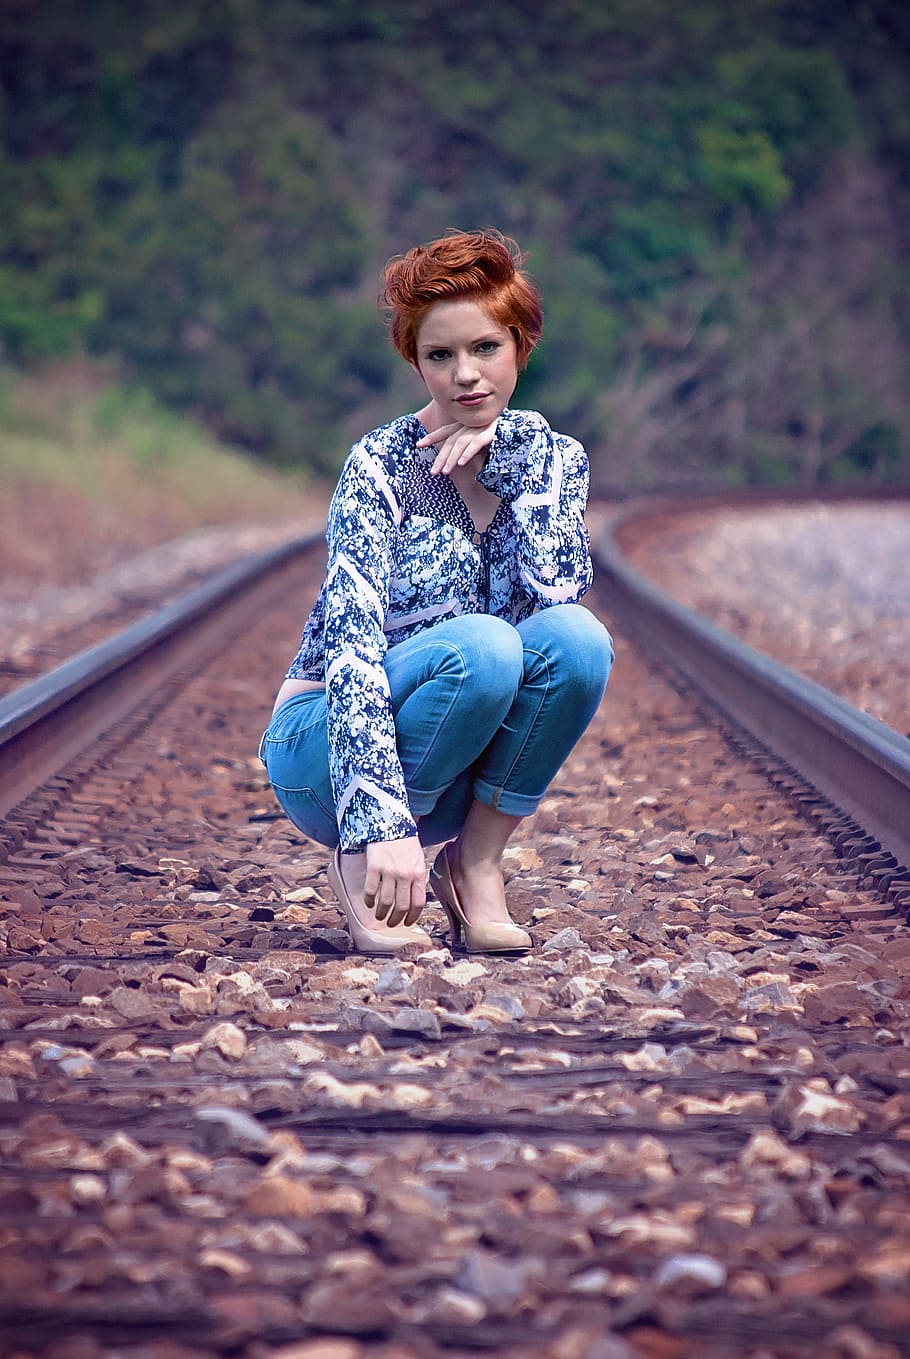 woman, blue, long-sleeved, top, jeans, train railings, girl, pose, squatting, young